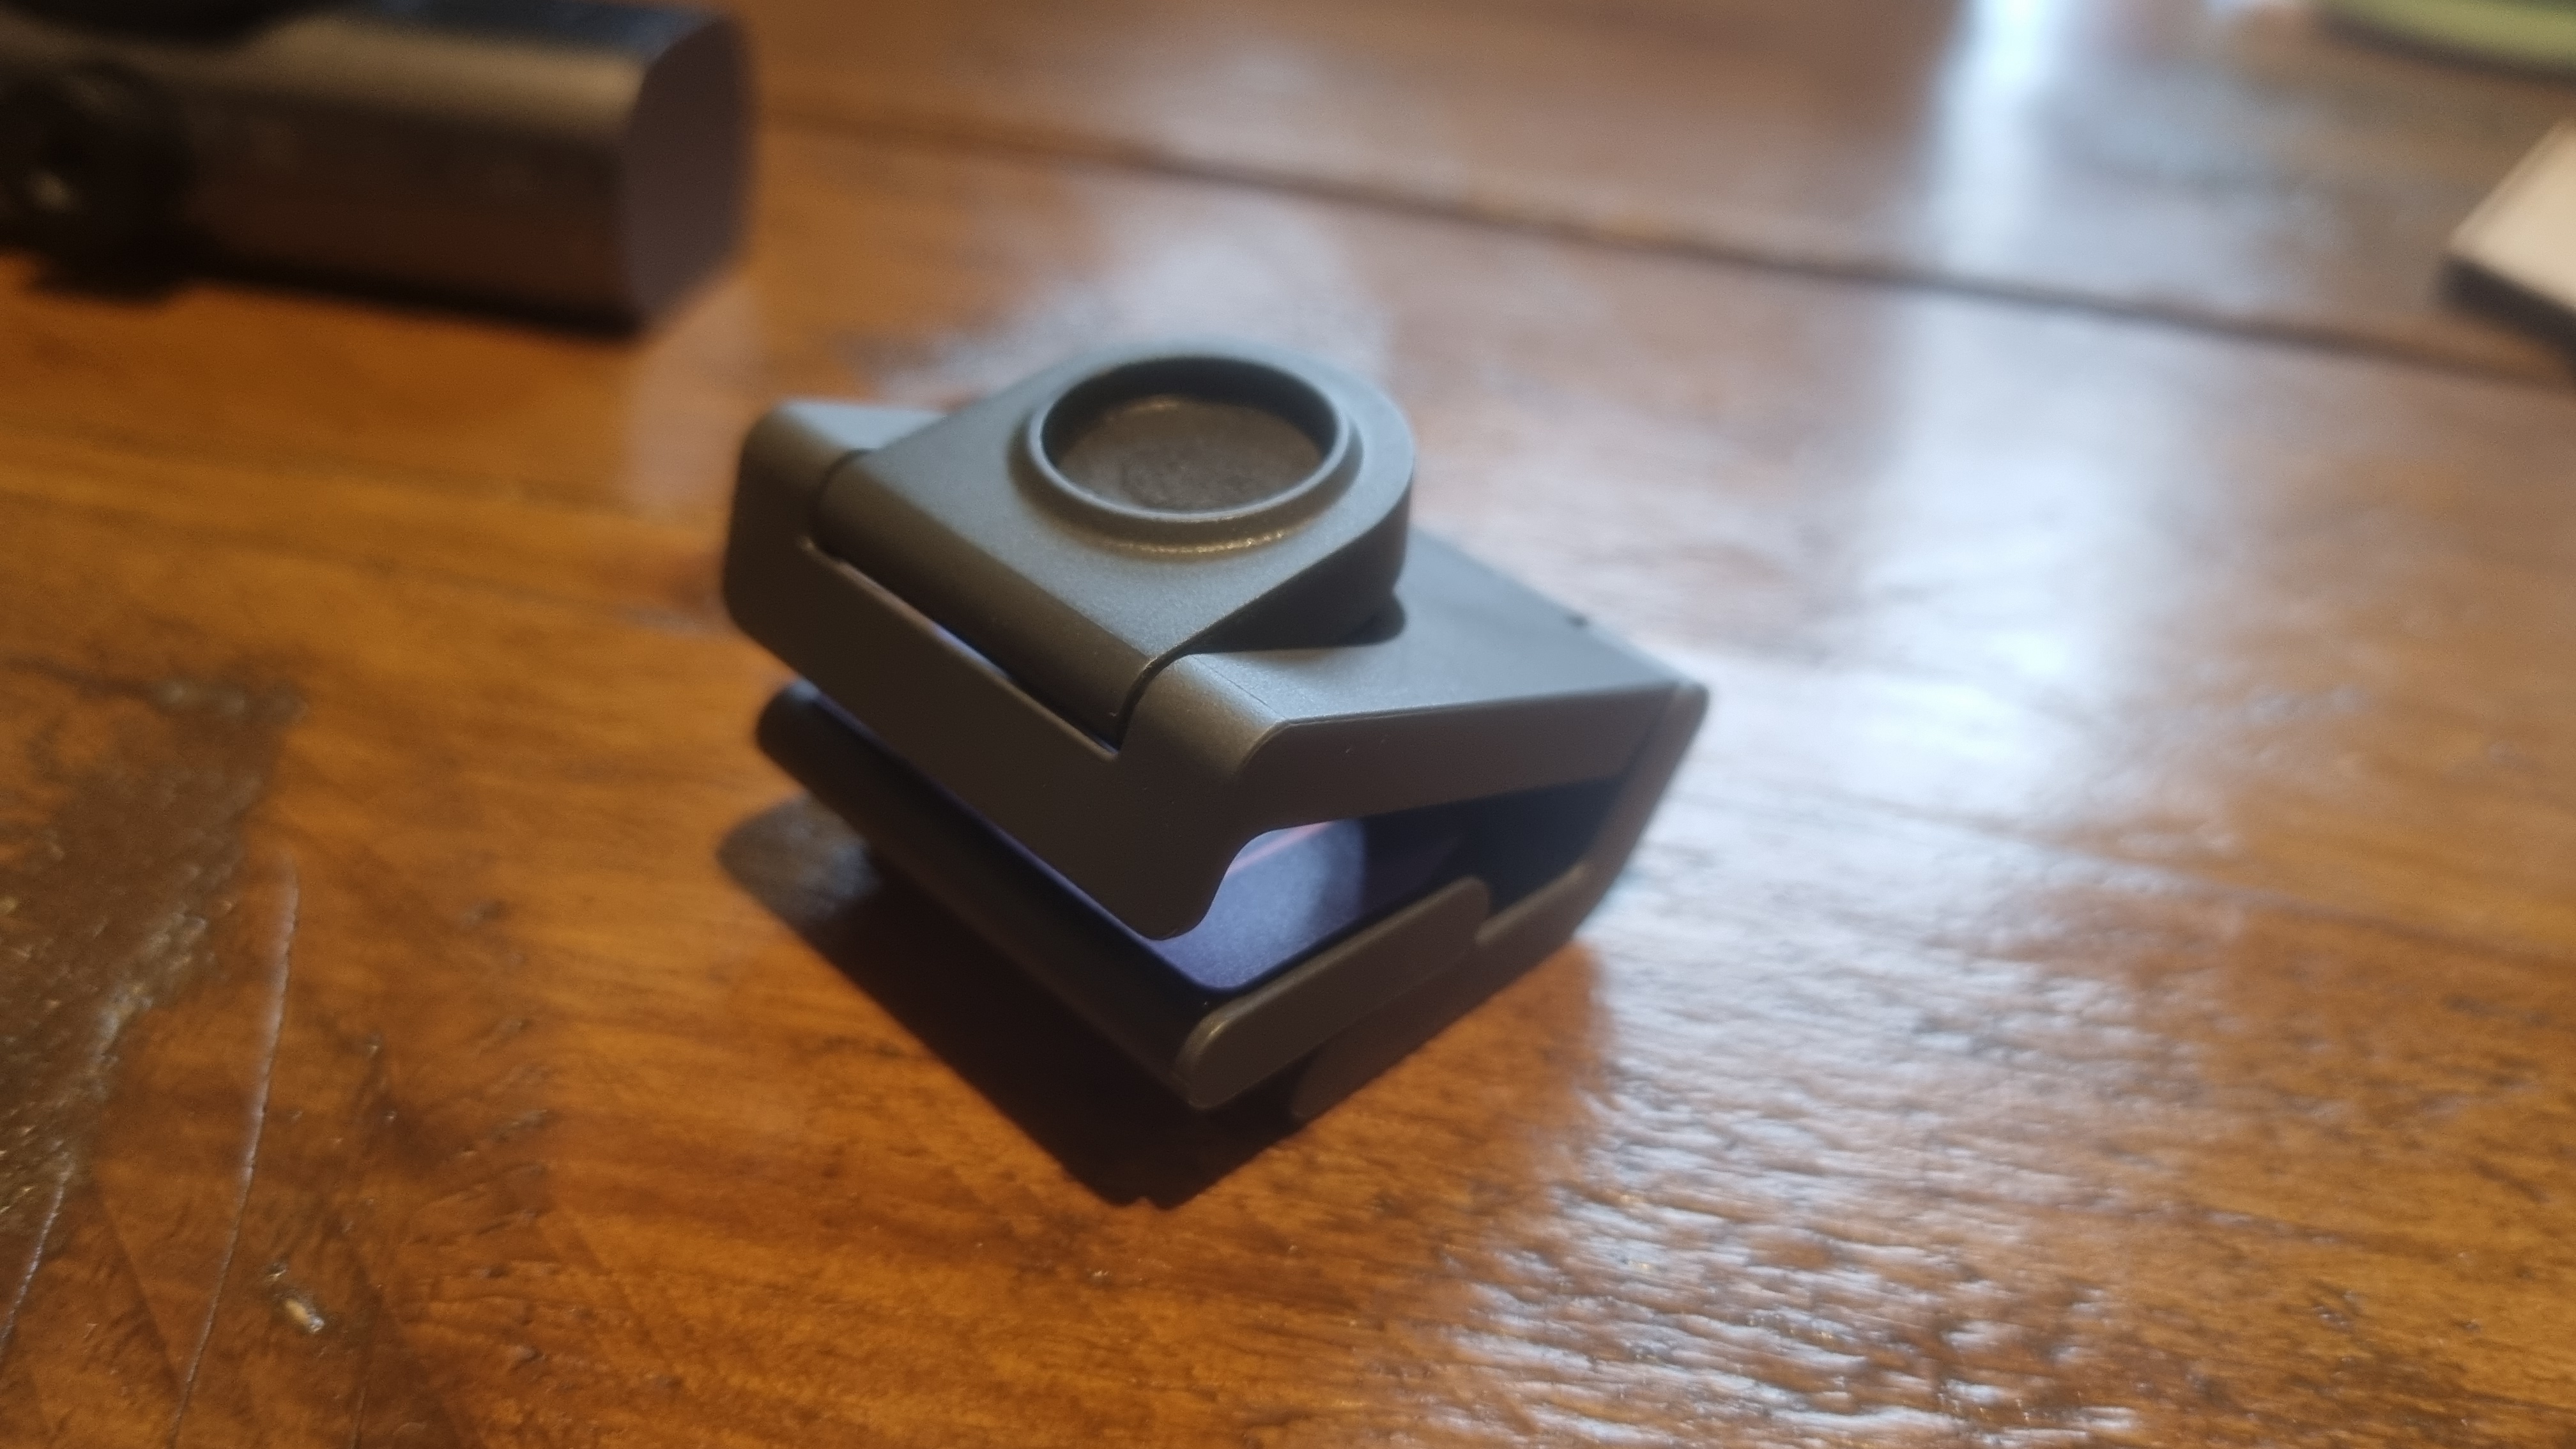 The mount for the Logitech MX Brio on a wooden desk